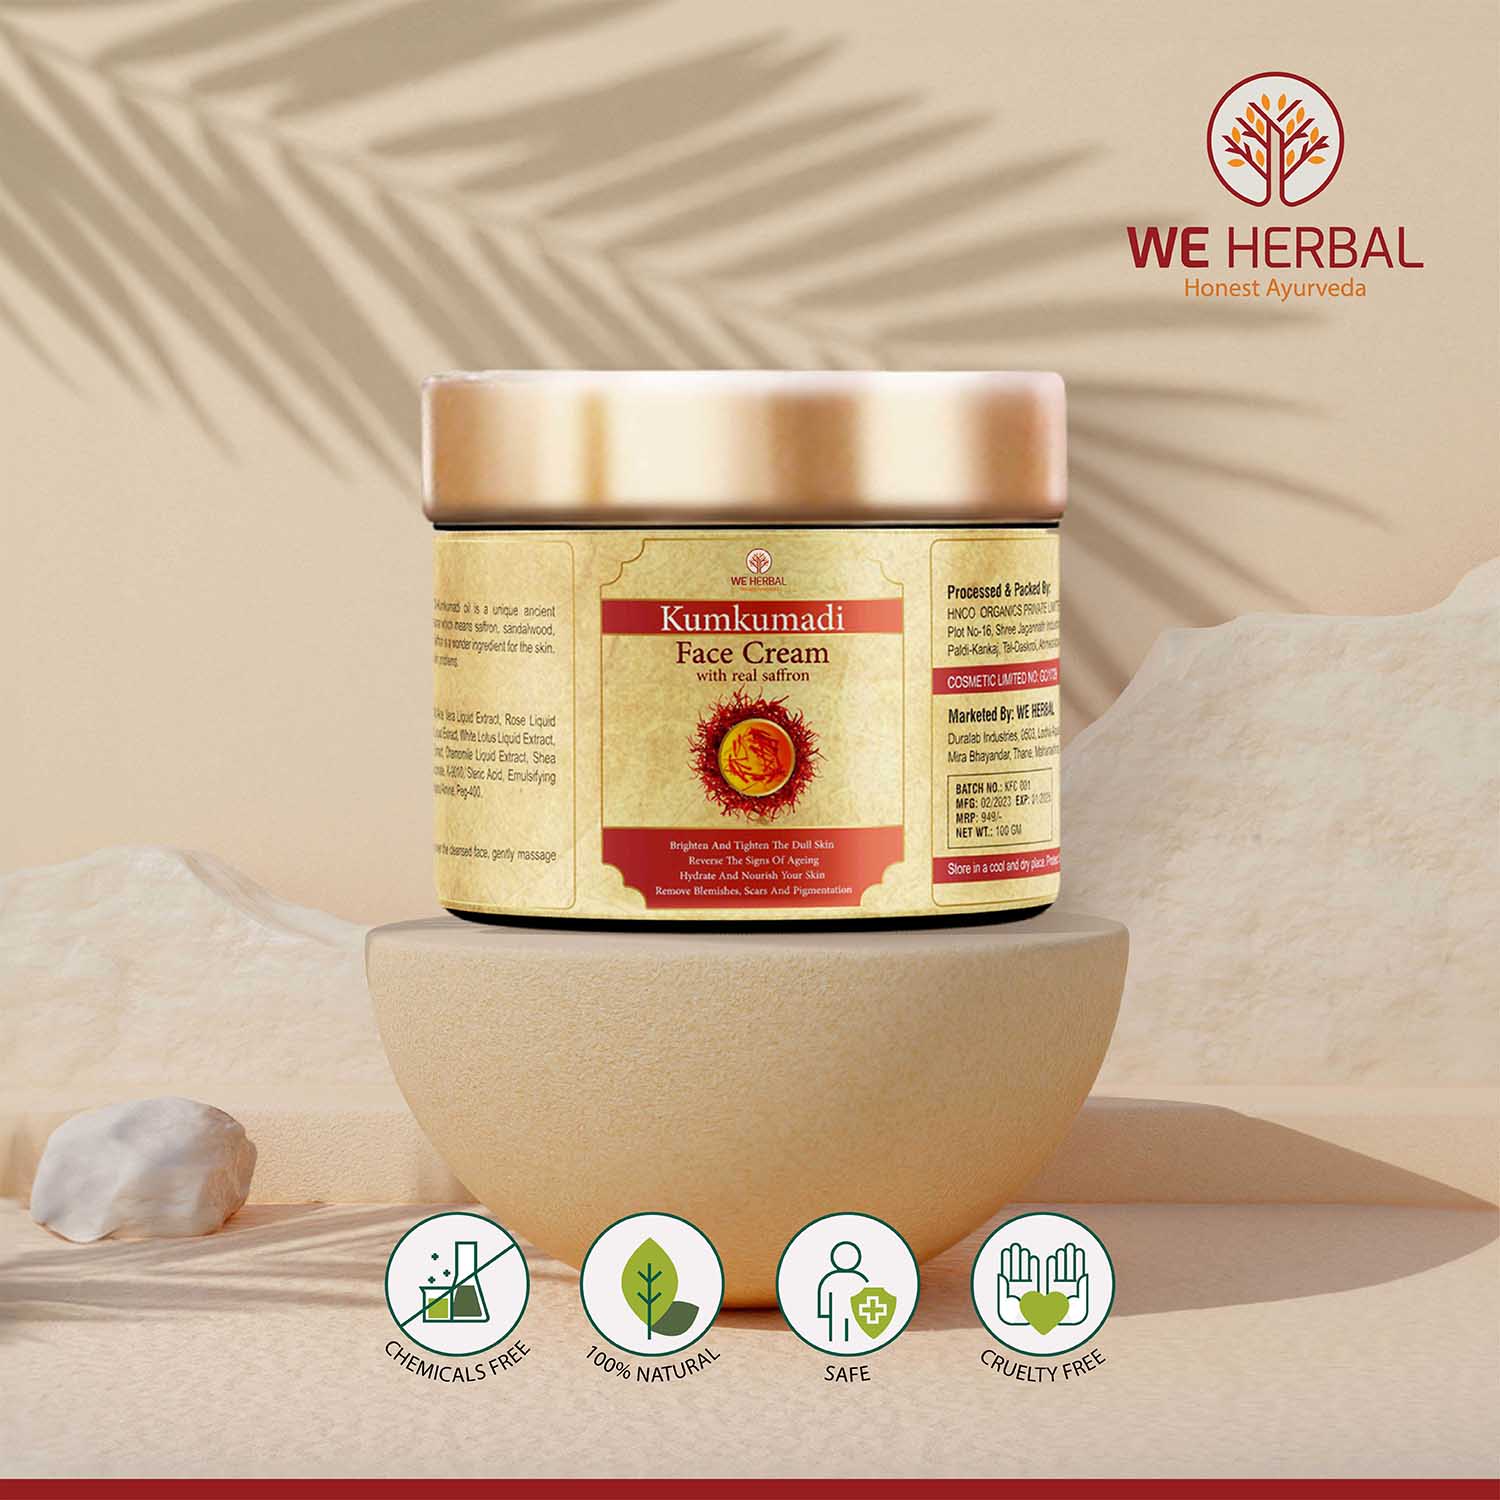 Kumkumadi Face Cream || No artificial chemicals || No added fragrance and colour We Herbal | Back to the Nature